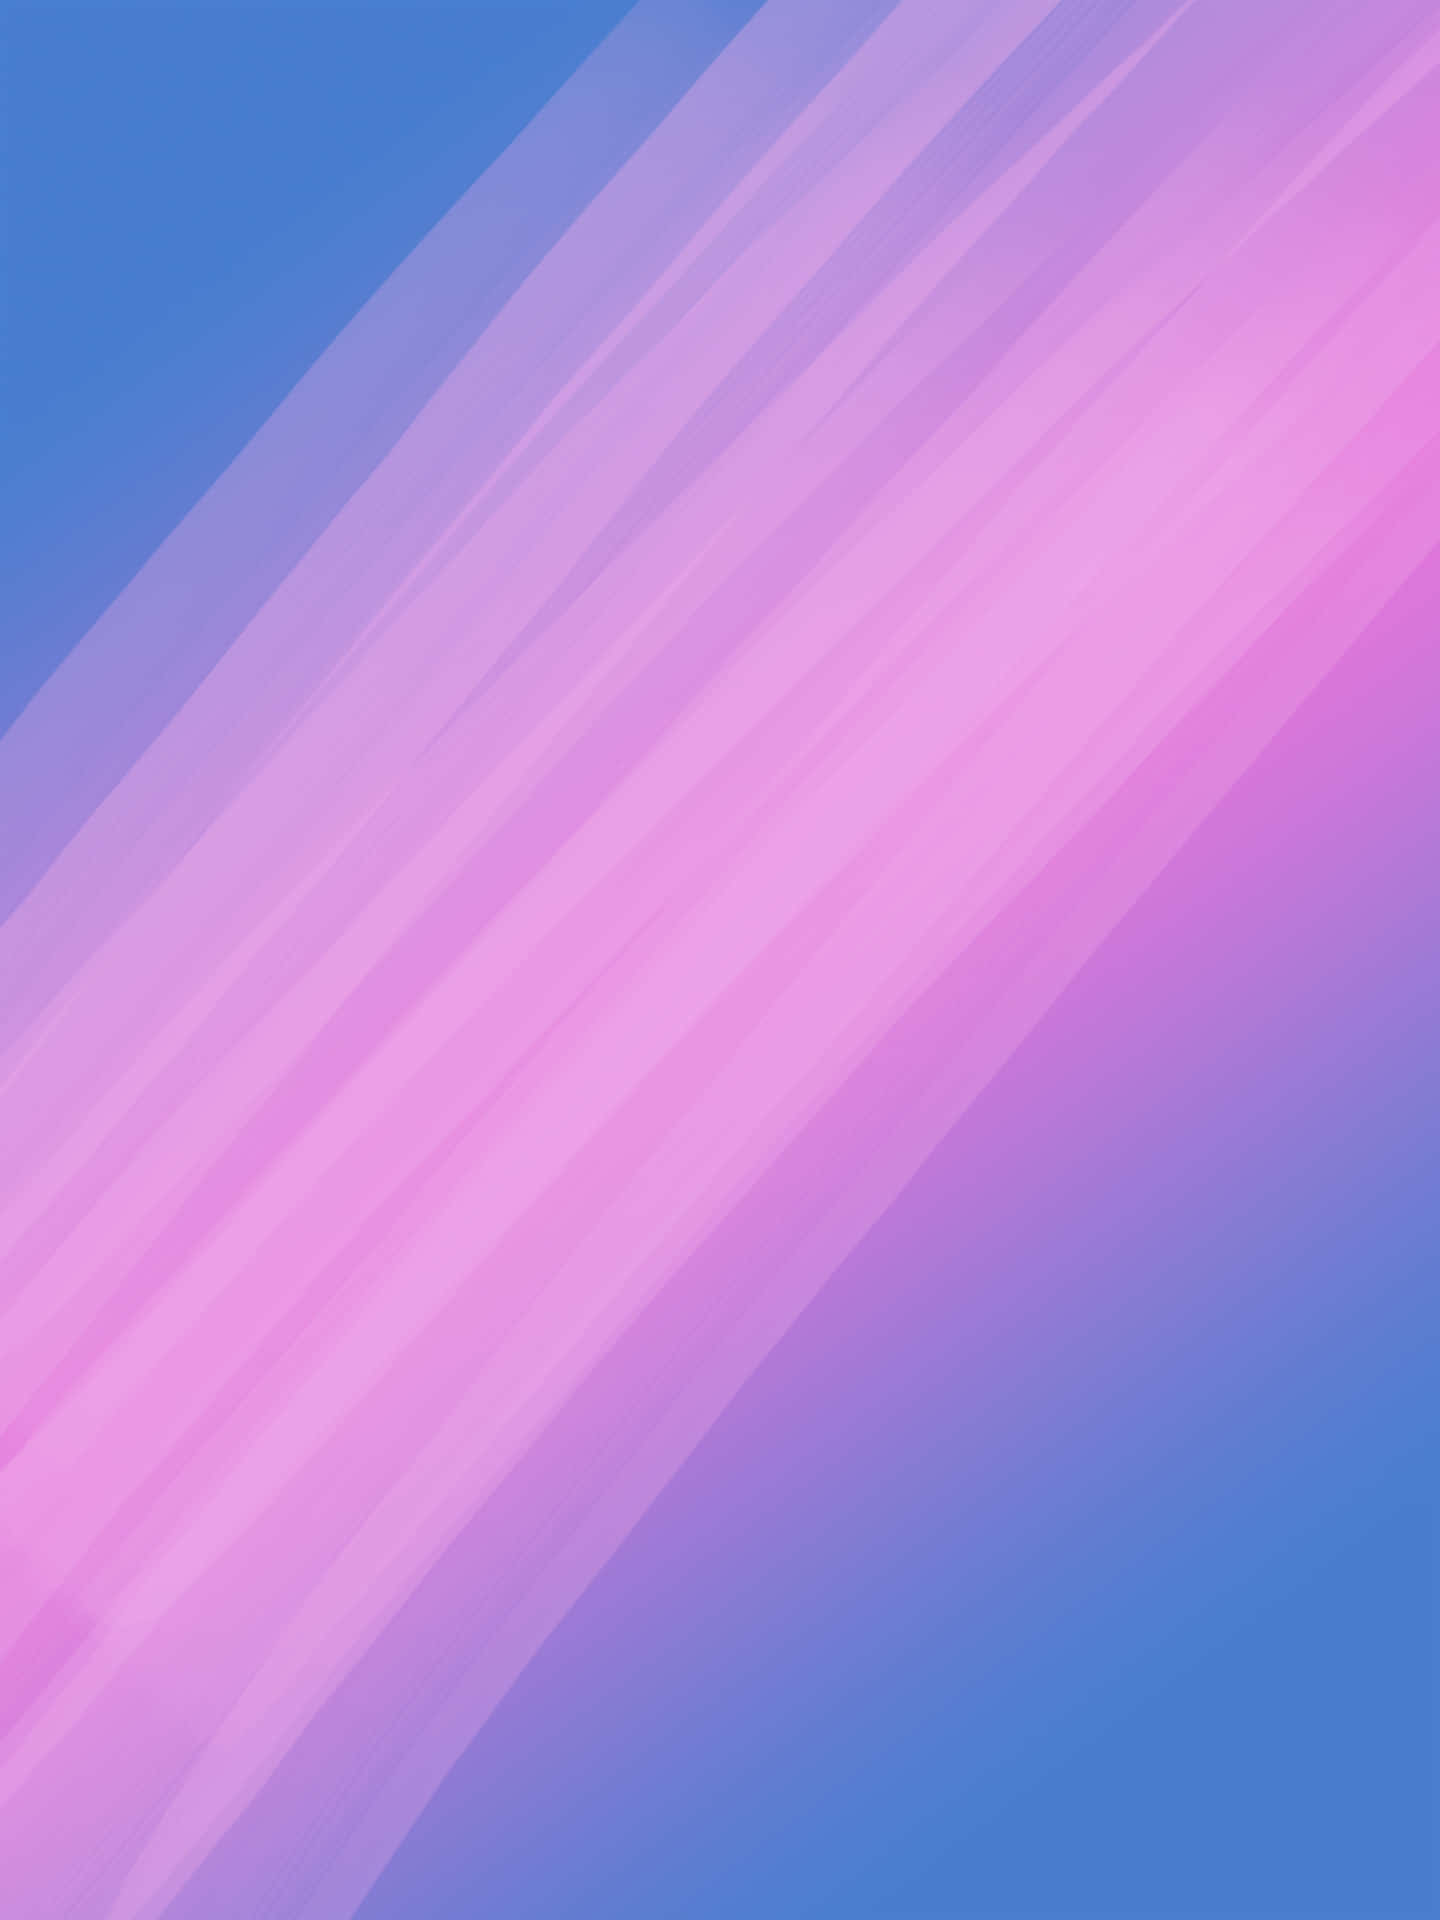 A Pink And Blue Abstract Background